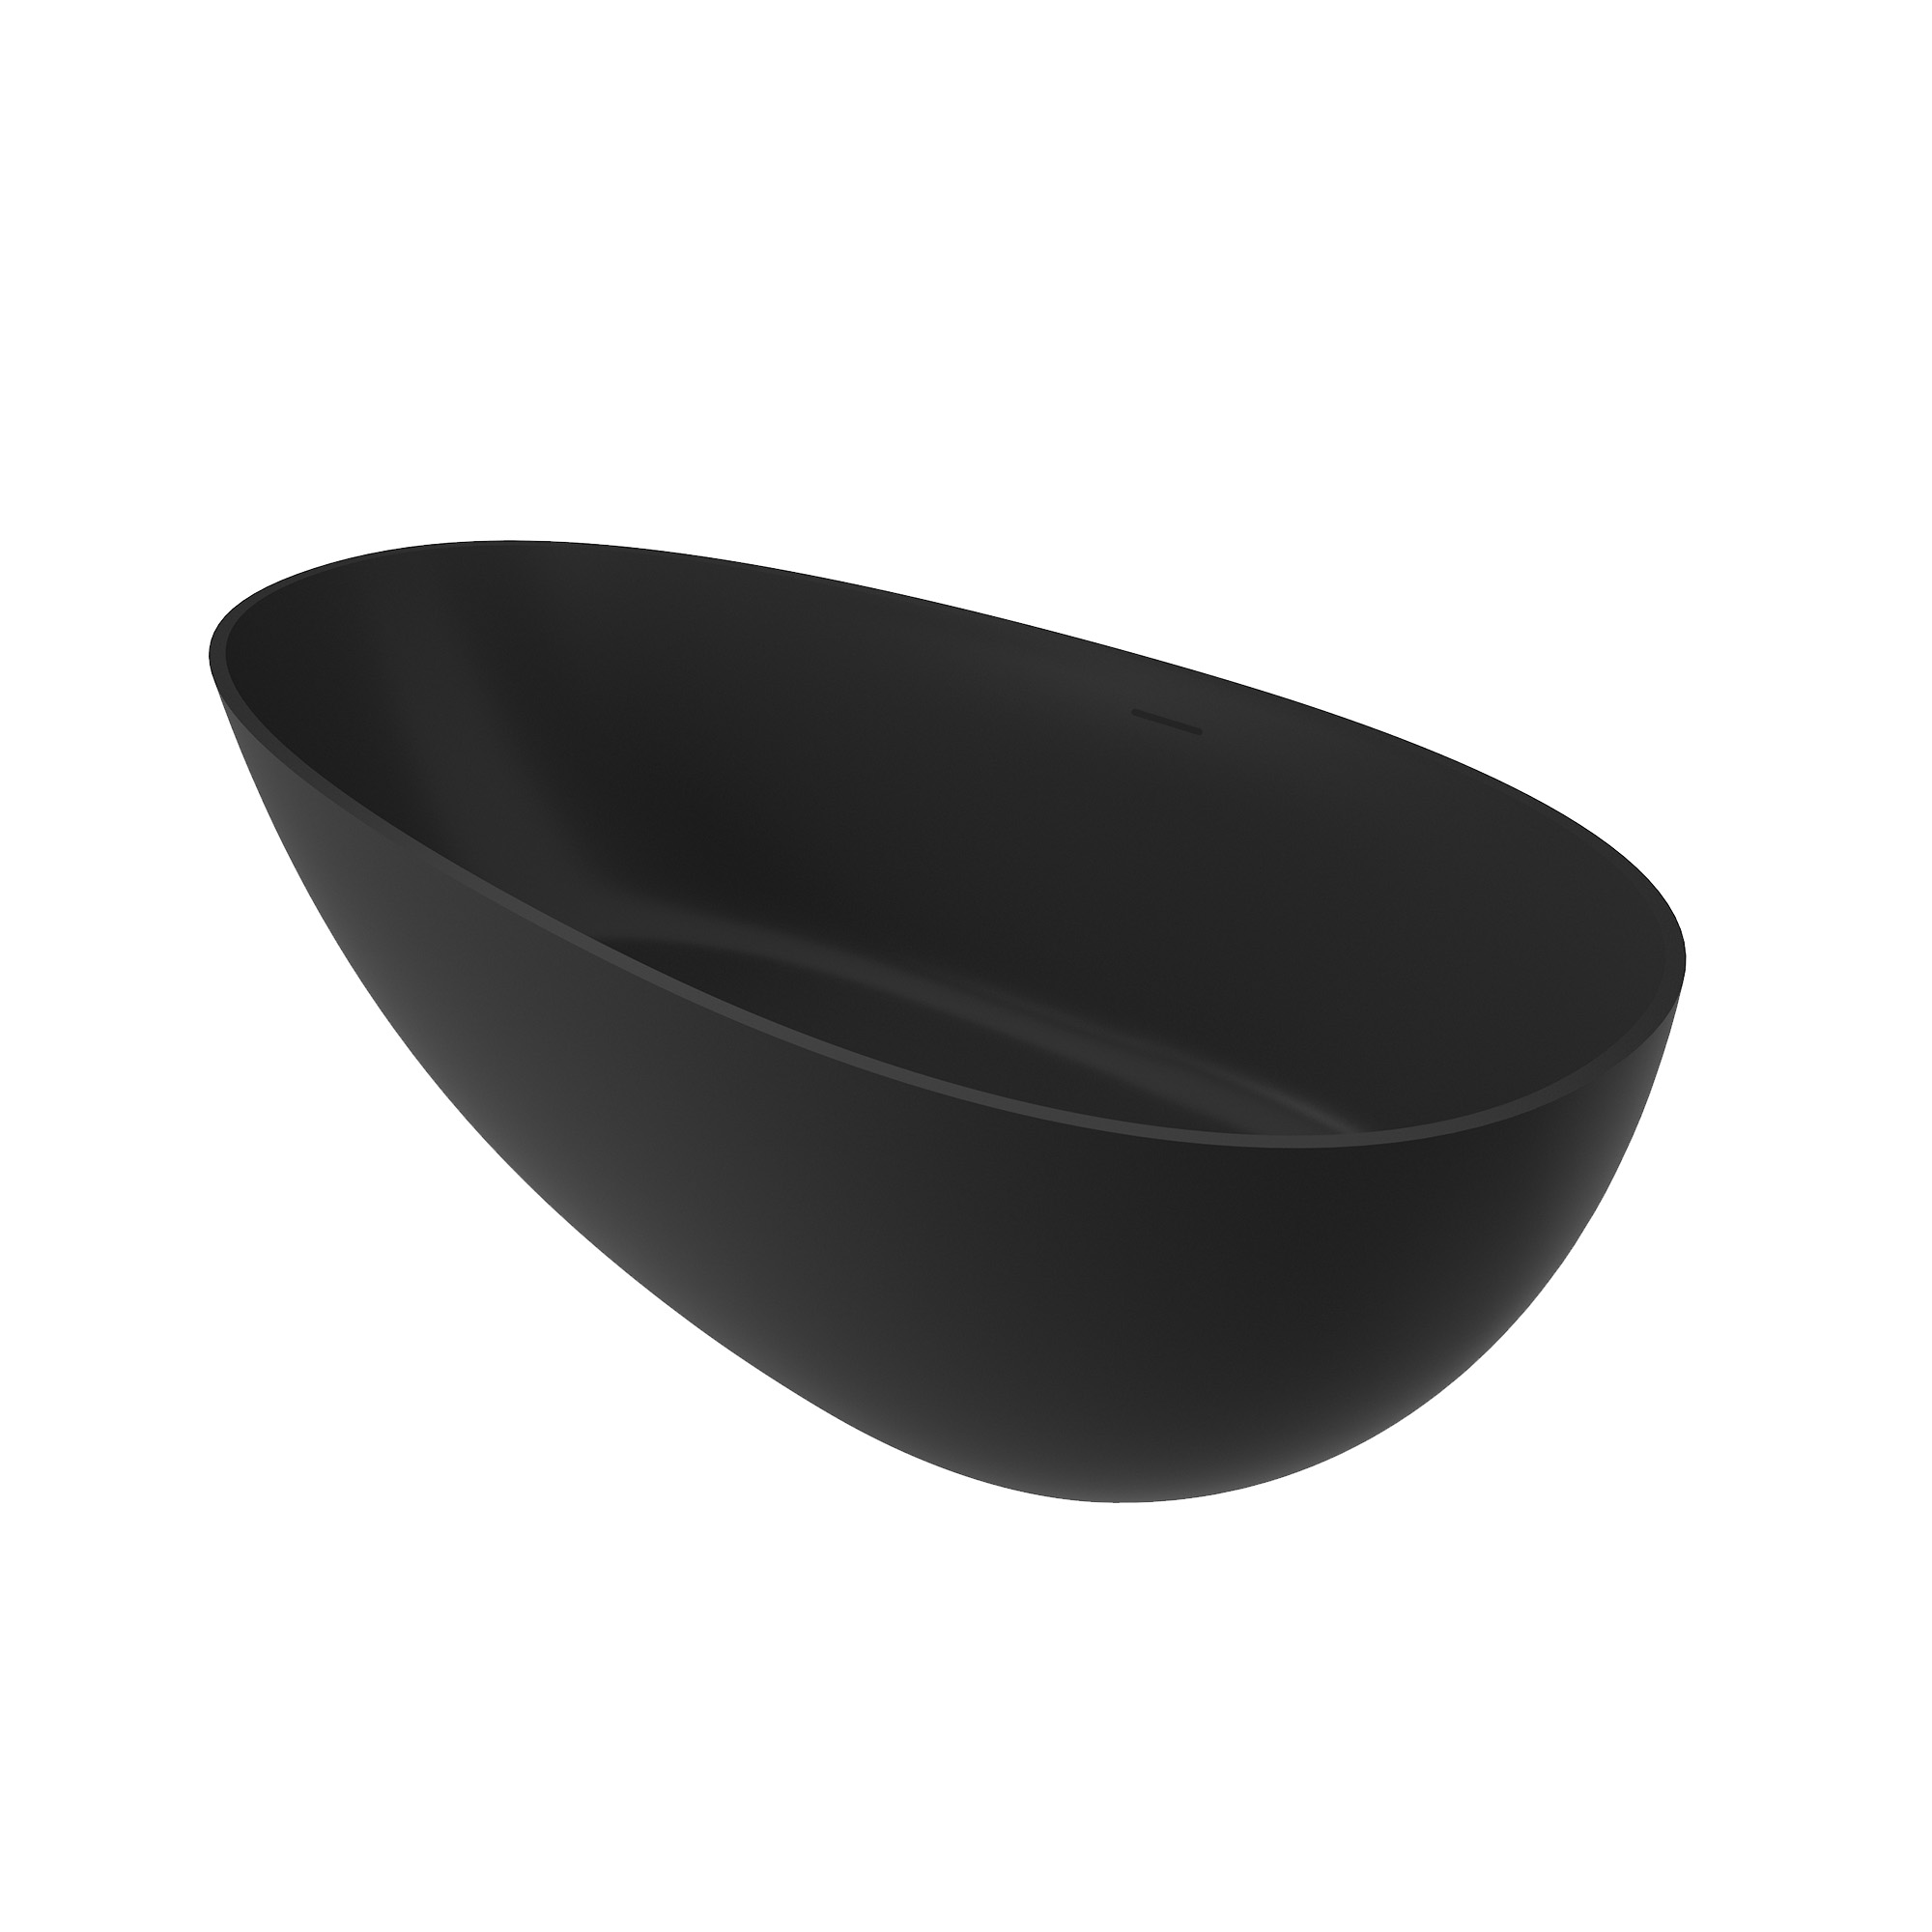 59" Solid Surface Freestanding Bathtub, Egg Shell Shapes Stone Resin Freestanding Tub with Overflow and Center Drain, Matte Black Color, Bringing a Luxurious Touch to Every Length